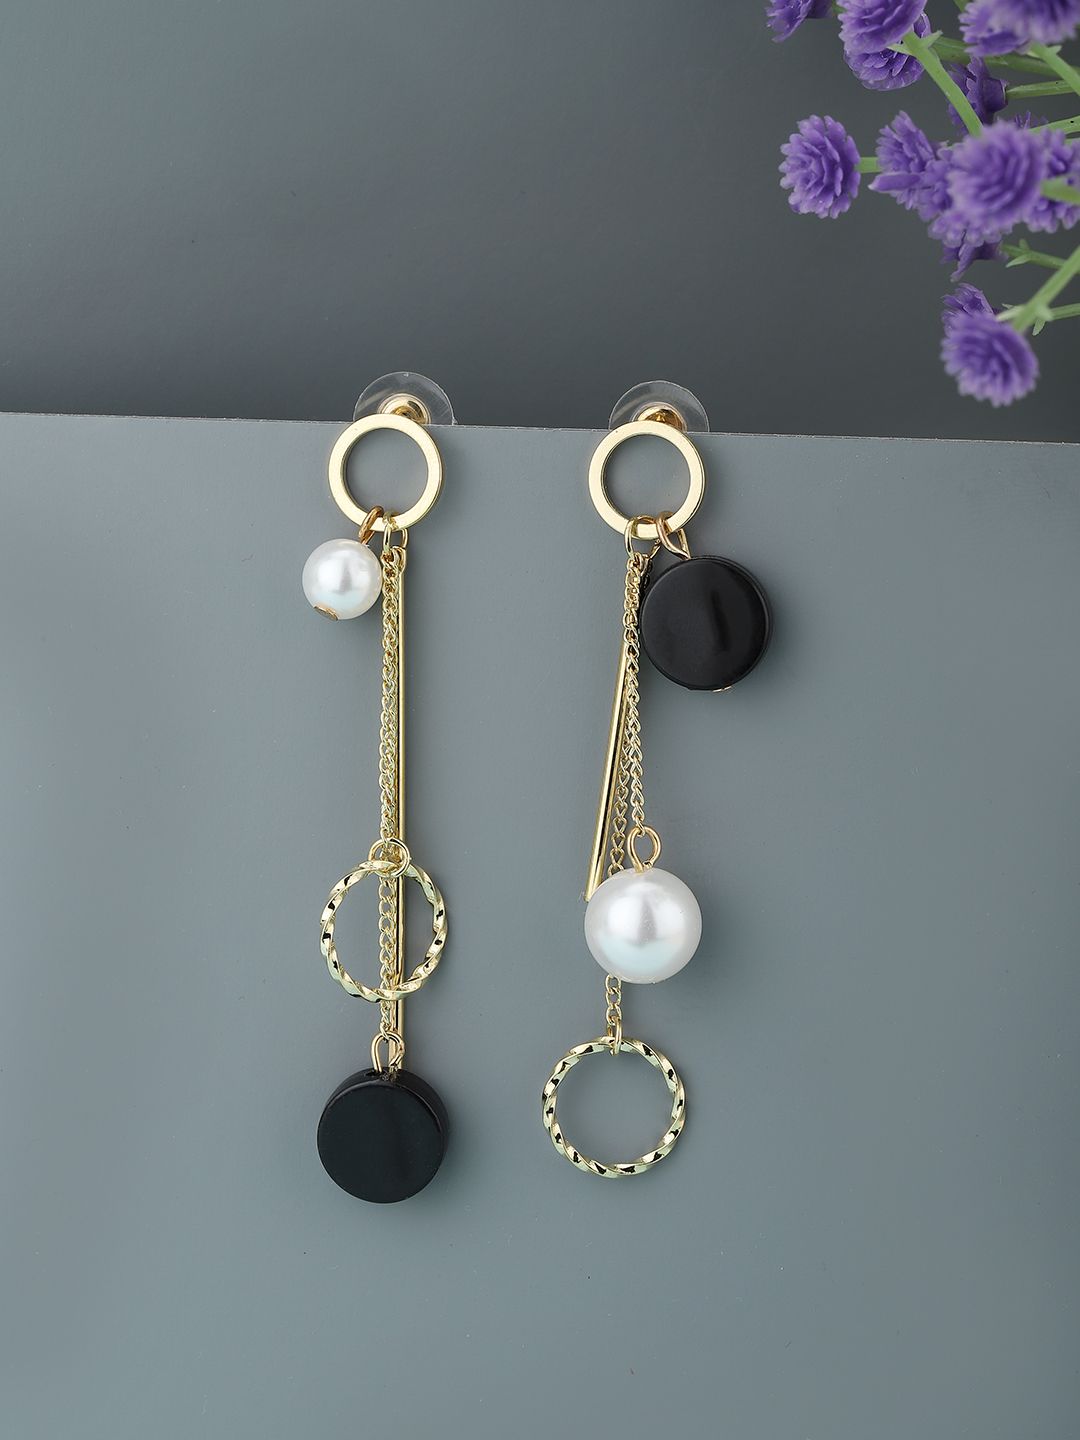 Carlton London Gold-Toned & Black Stone Studded Beaded Contemporary Drop Earrings Price in India